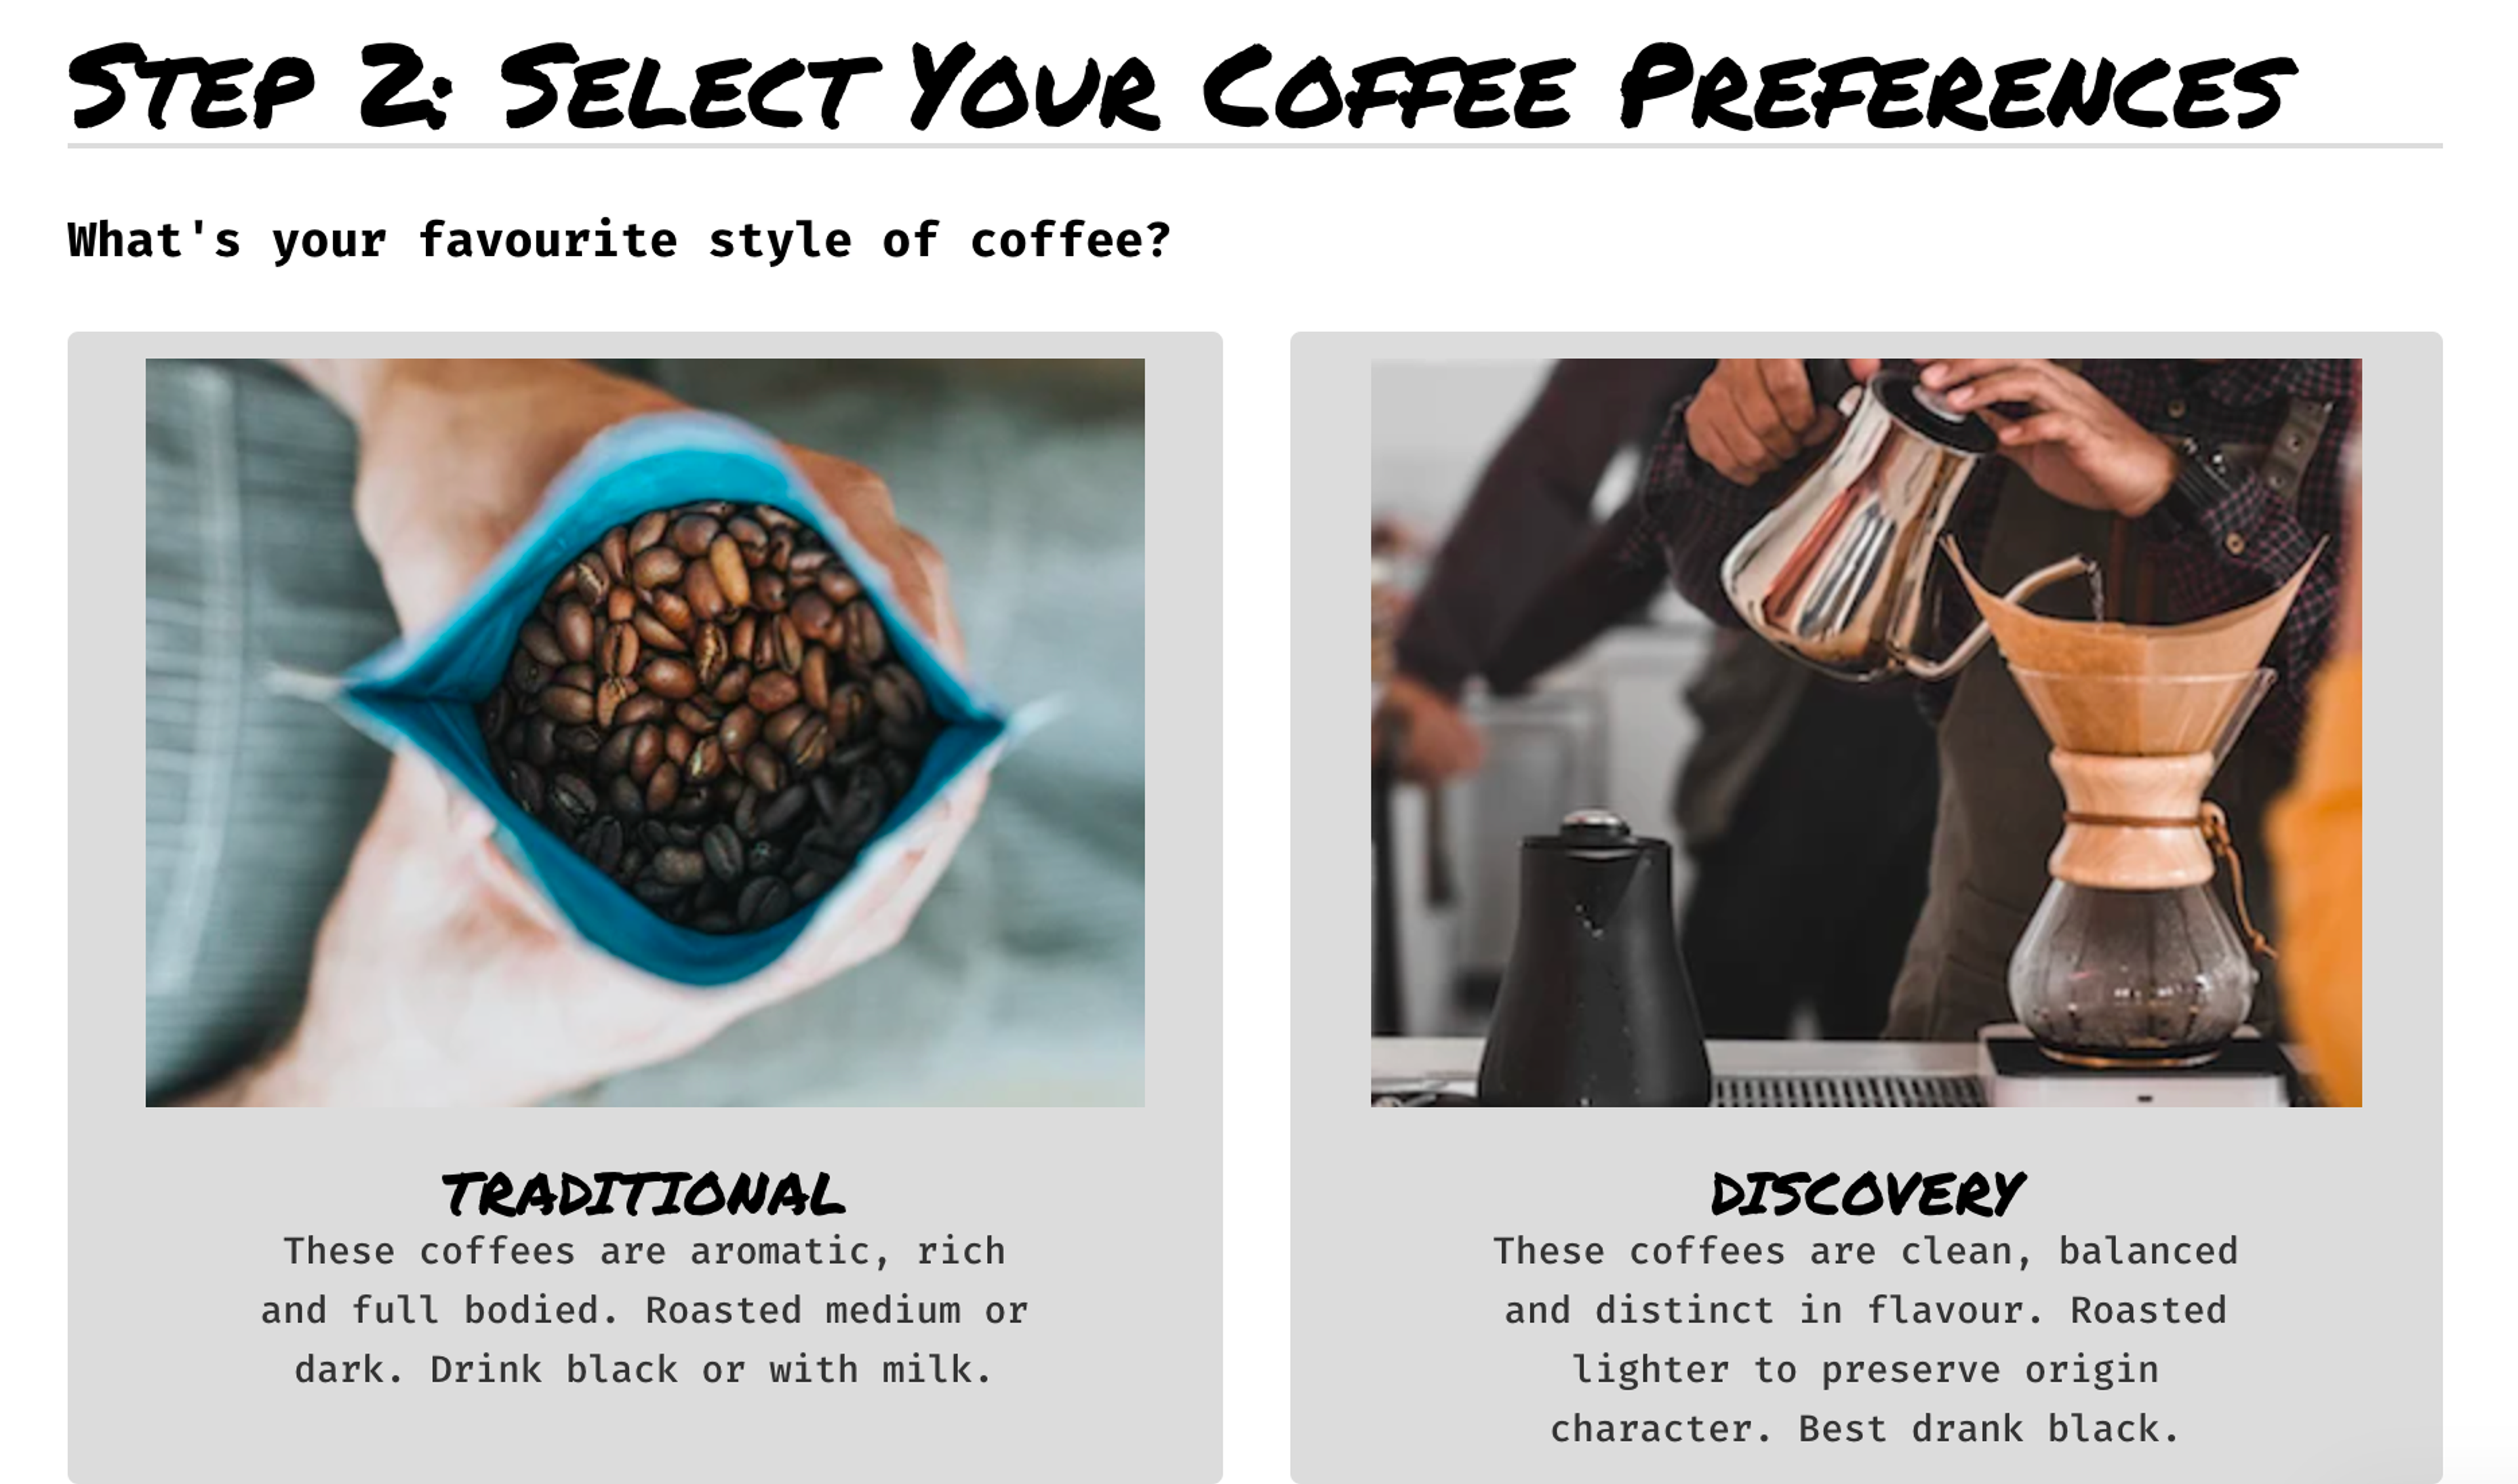 Rave Coffee subscription options